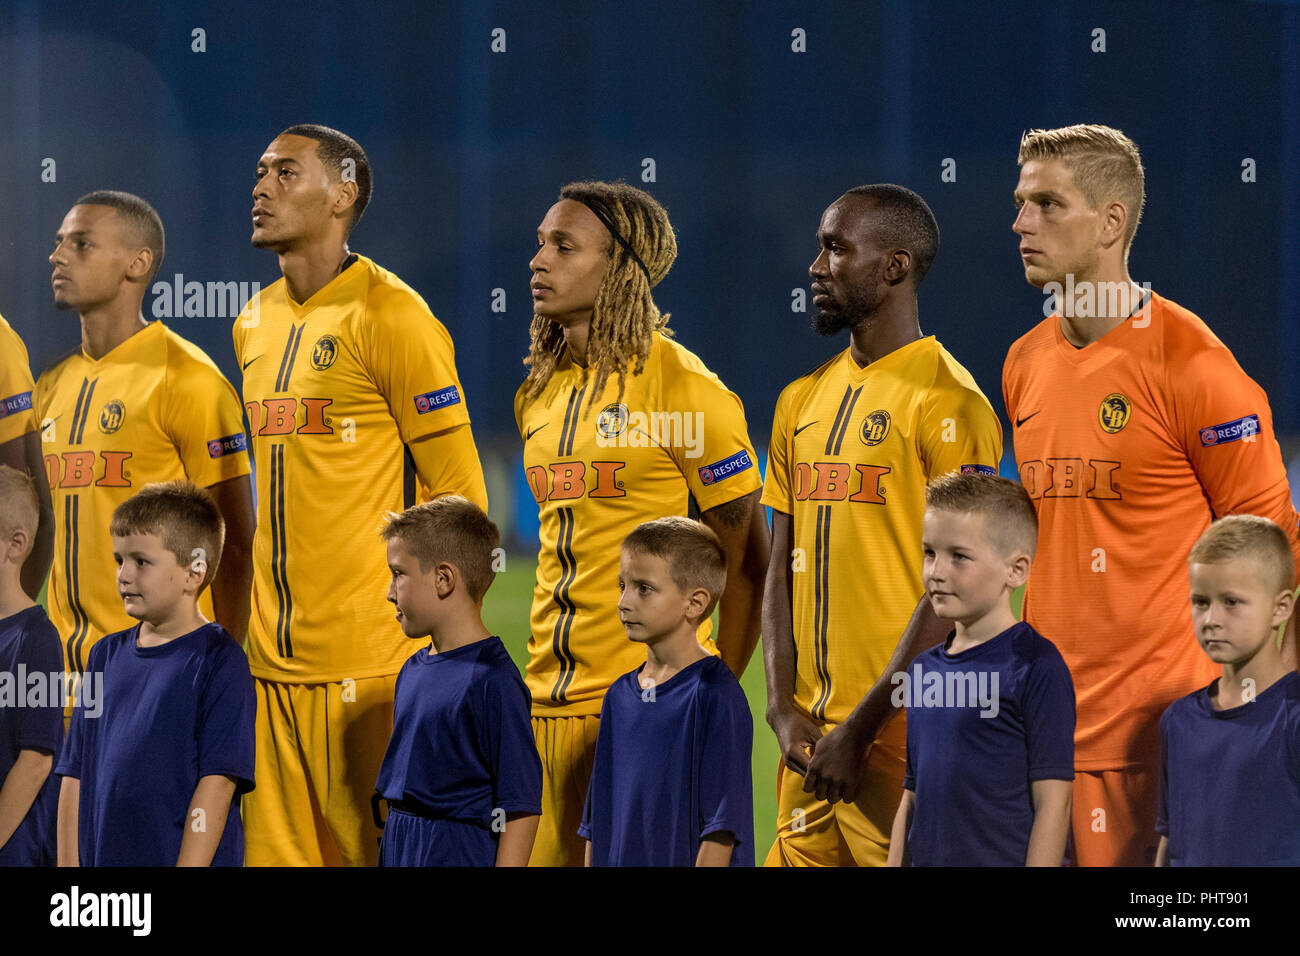 ZAGREB, CROATIA - AUGUST 28, 2018: UEFA Champions League Playoffs, GNK Dinamo vs. BSC Young Boys. Young Boys players lineup Stock Photo